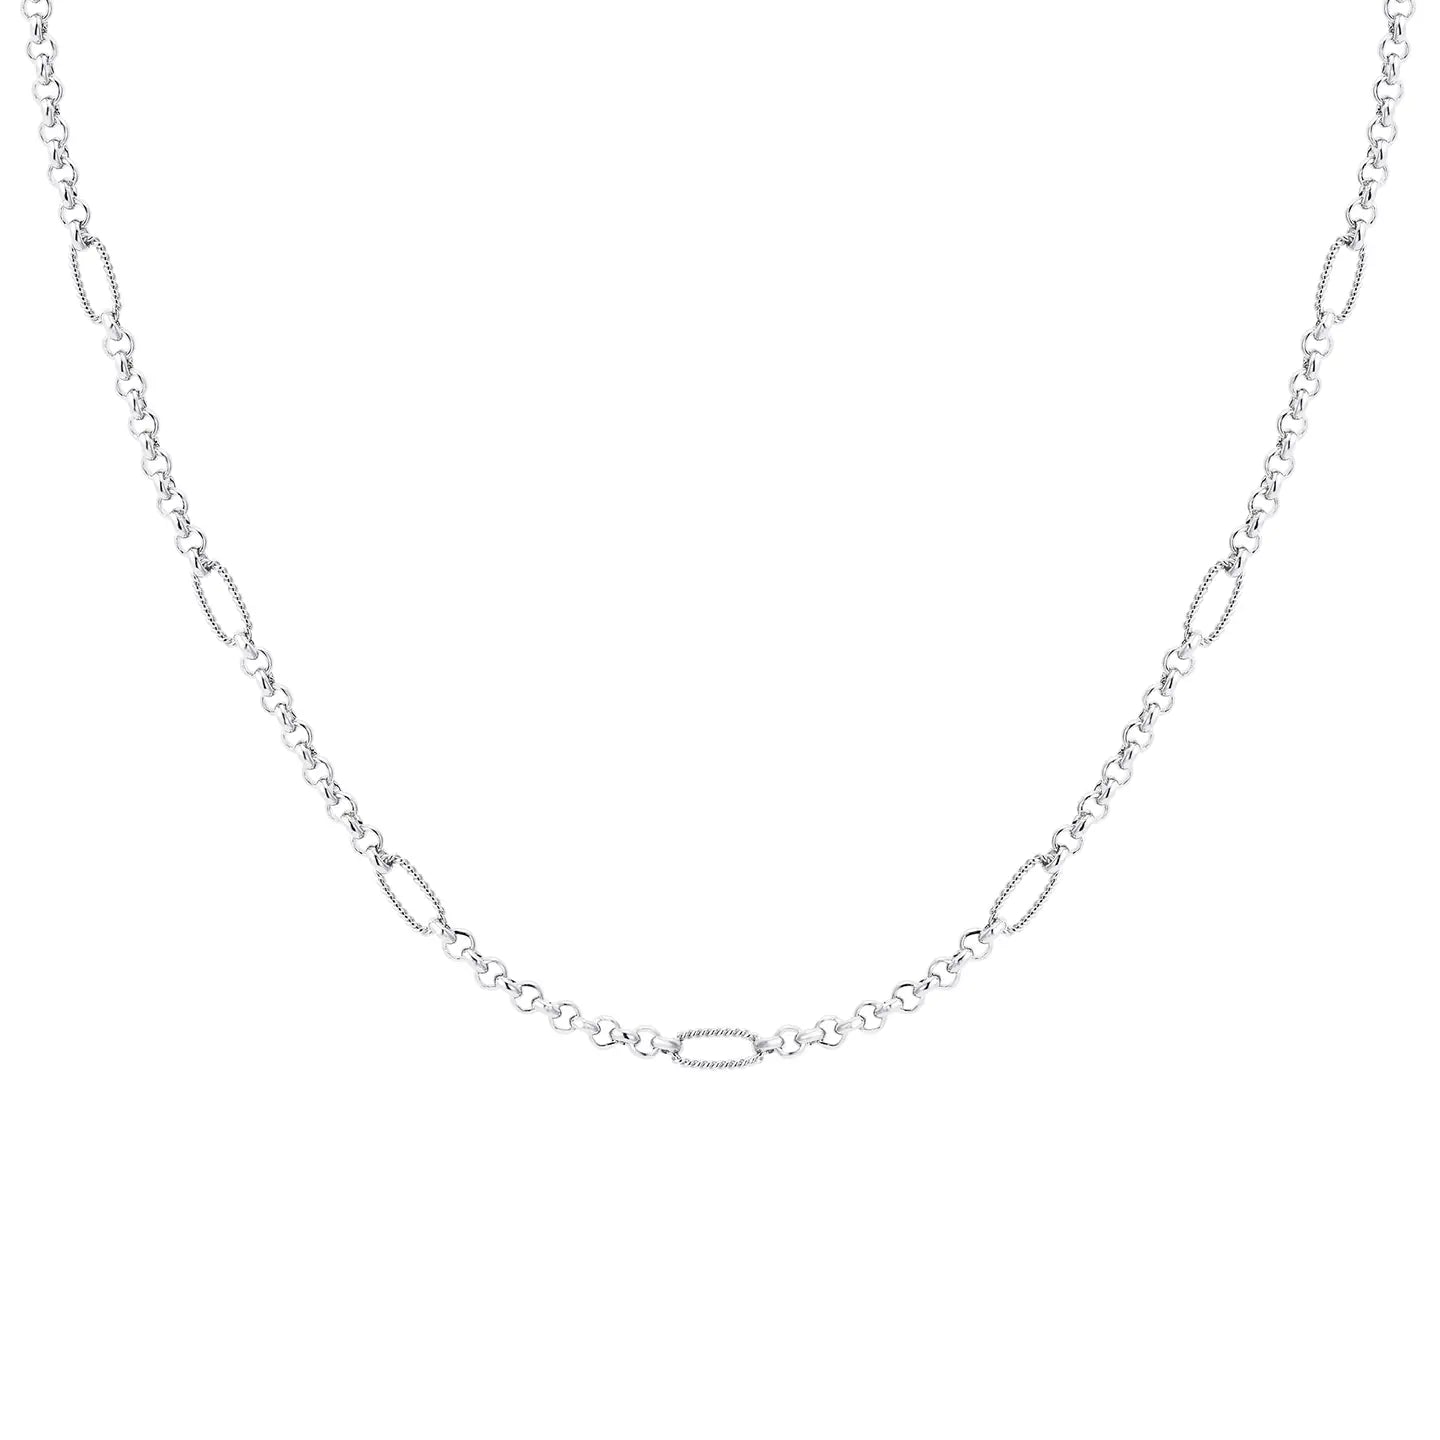 Natalie Wood - Eclipse Layering Cain Necklace Silver-120 Jewelry & Hair-Natalie Wood-July & June Women's Fashion Boutique Located in San Antonio, Texas